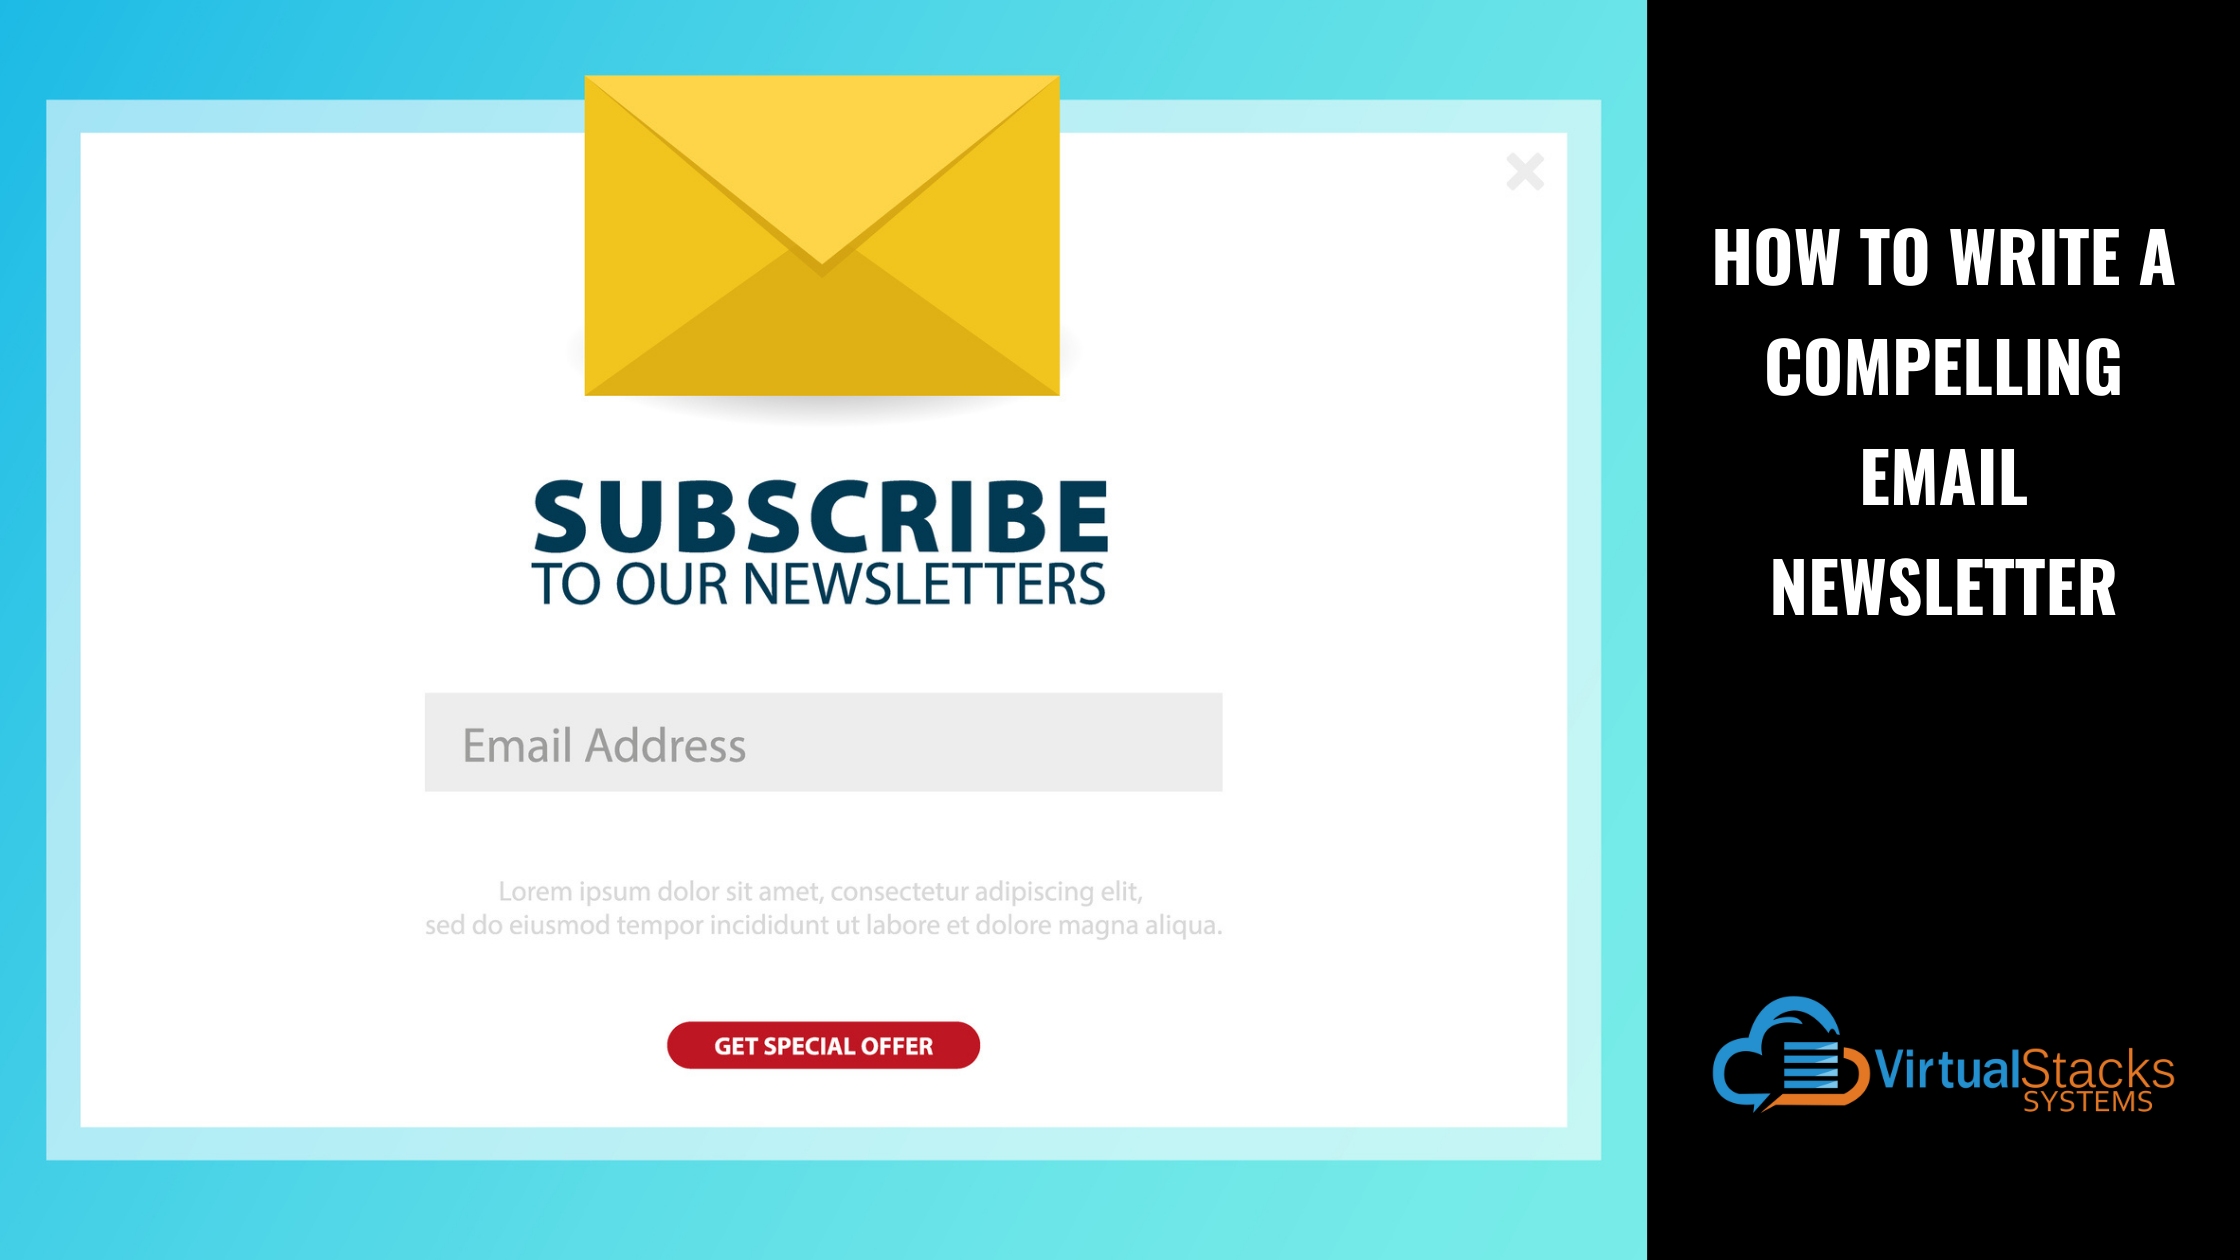 How to Write a Compelling Email Newsletter